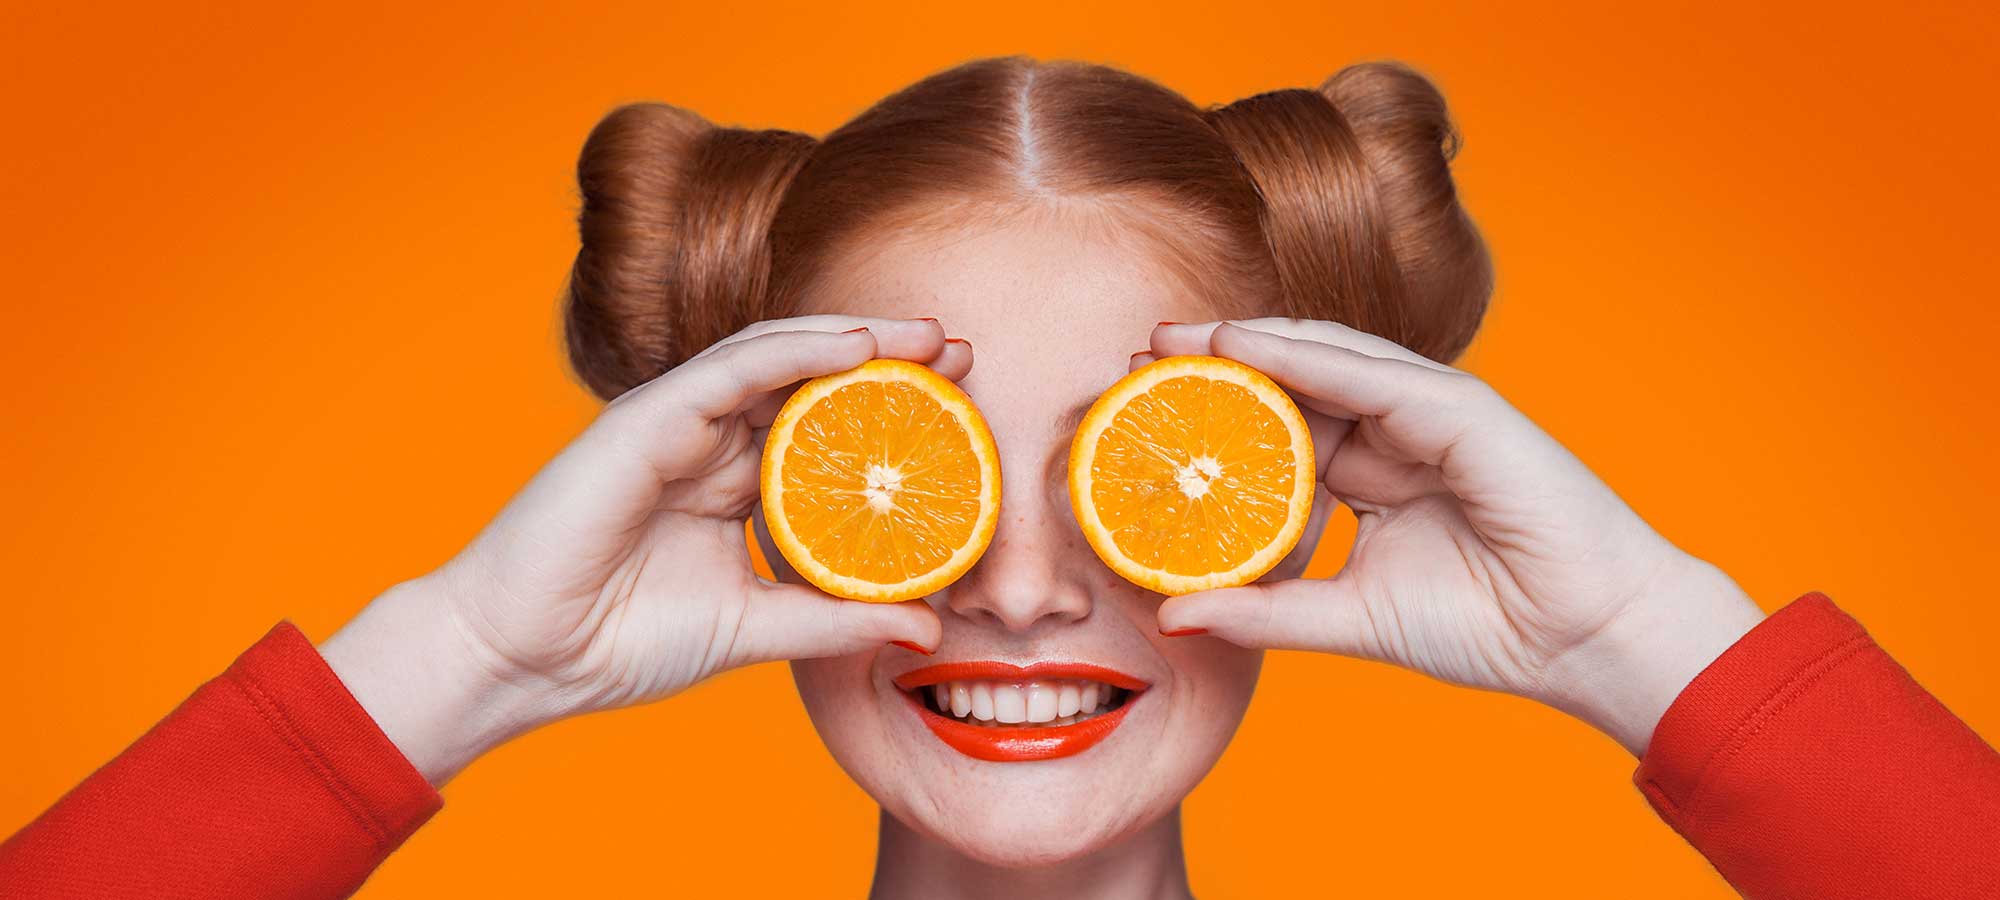 A lady has two halves of an orange held in front of her eyes. She has reddish hair and is smiling. There is a bright orange background.